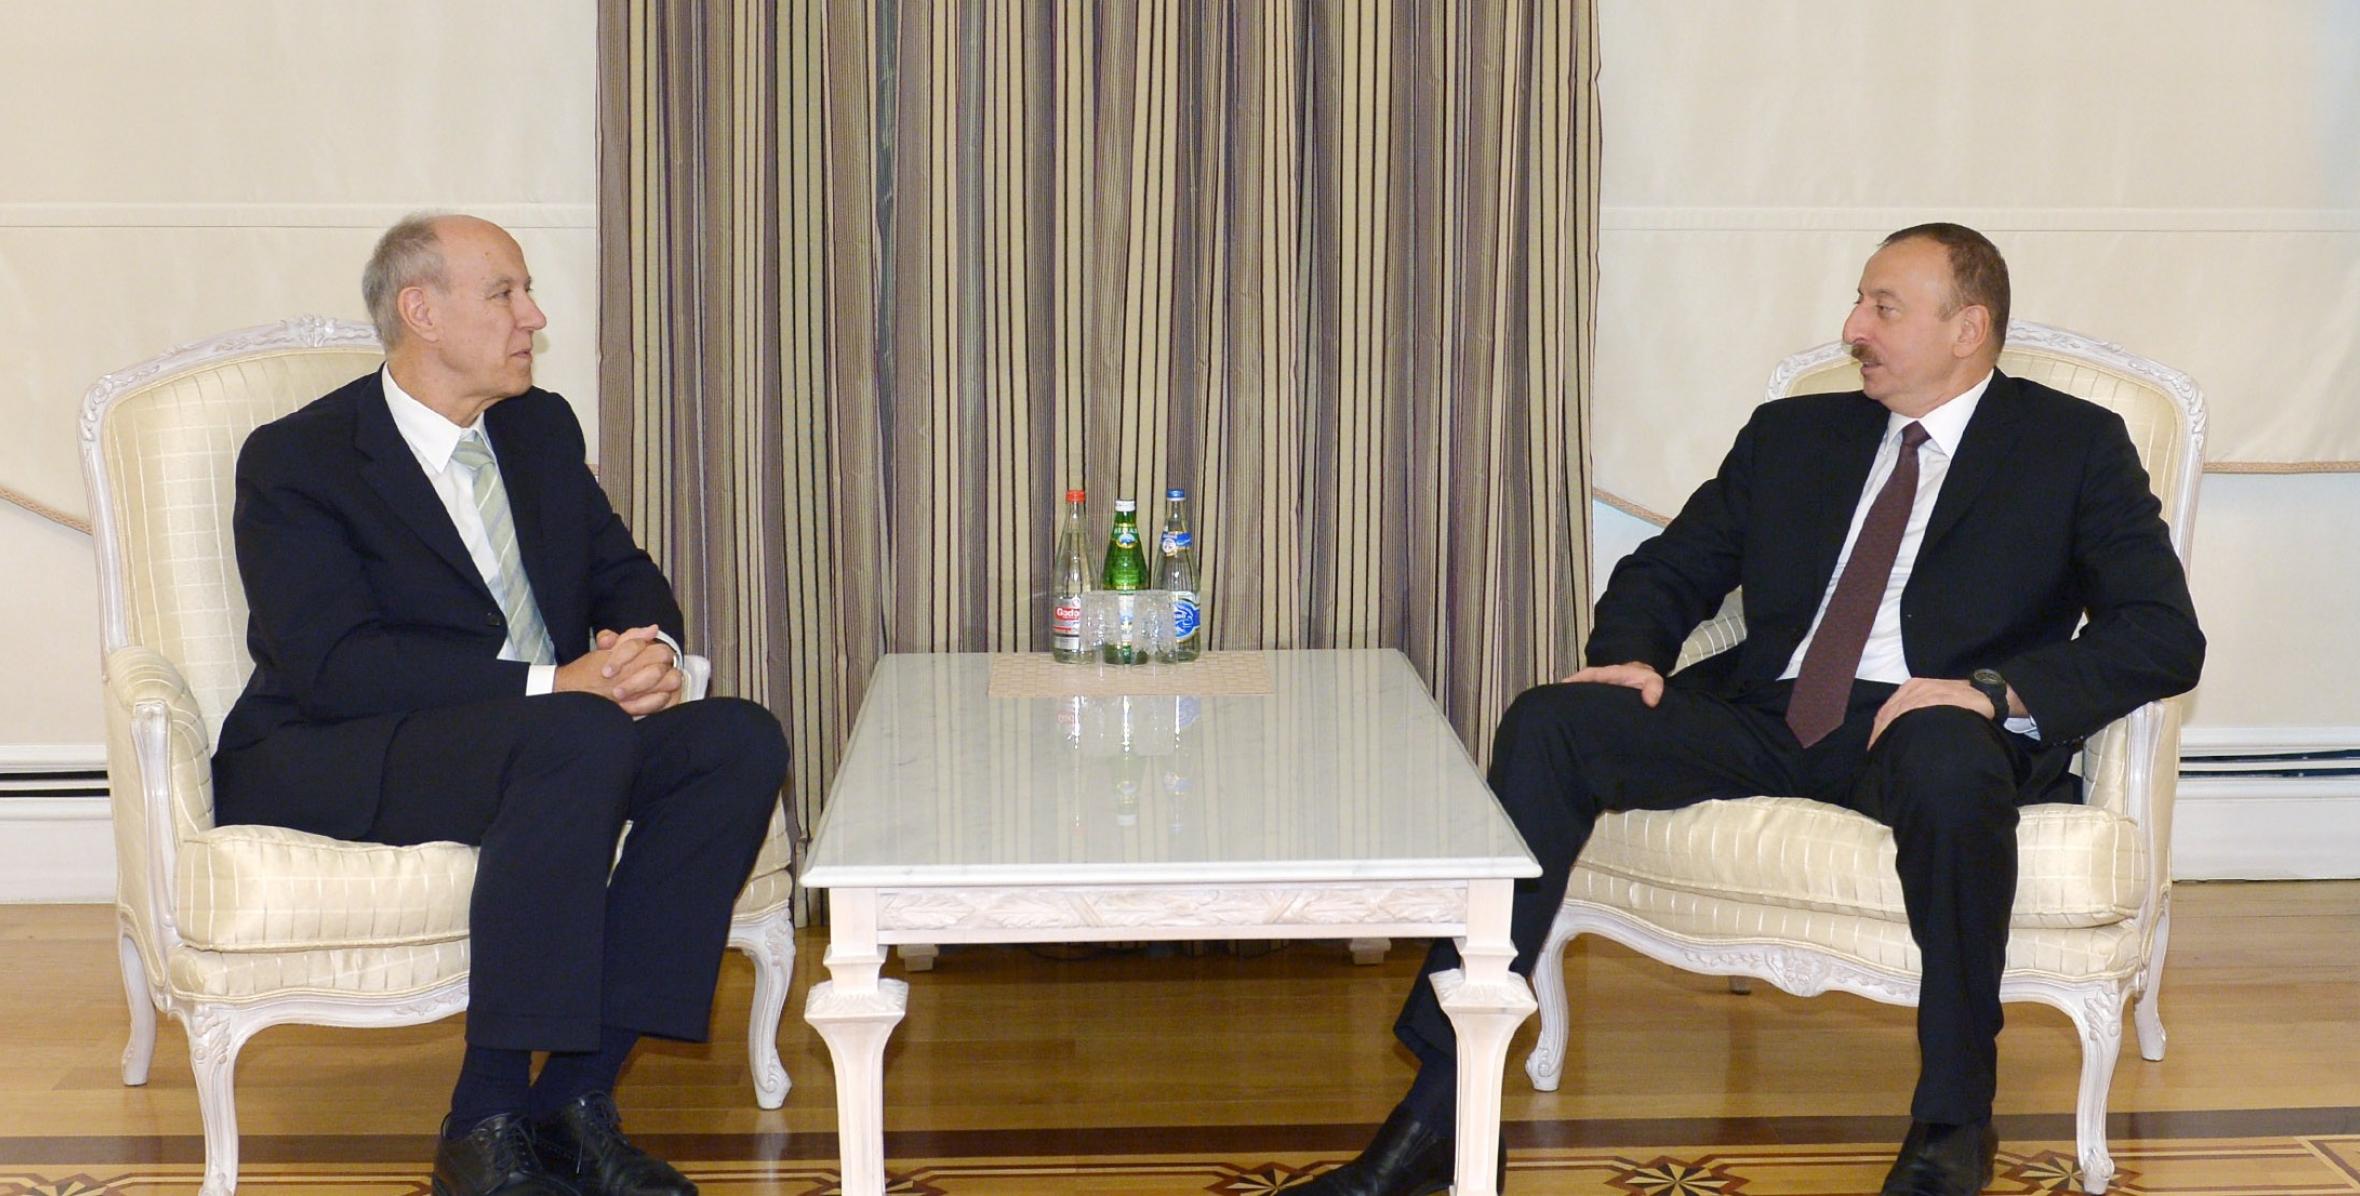 Ilham Aliyev received the director general of the World Intellectual Property Organization